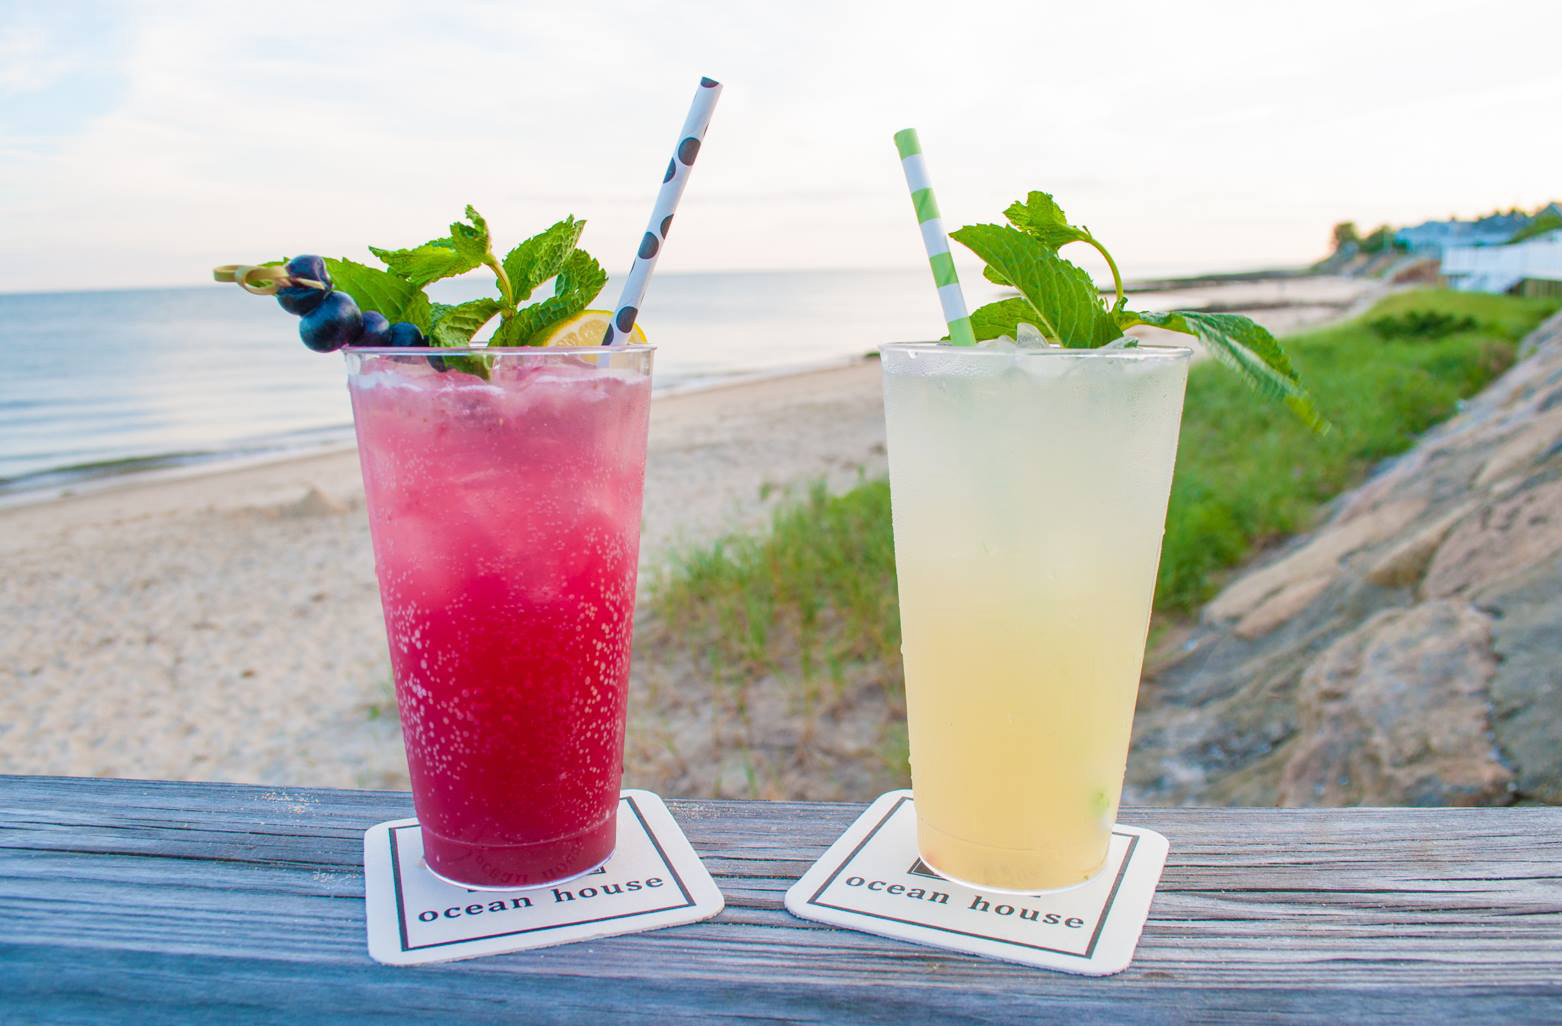 Ocean House Restaurant resides the Beach Bar, one of the Cape's coolest hot spots